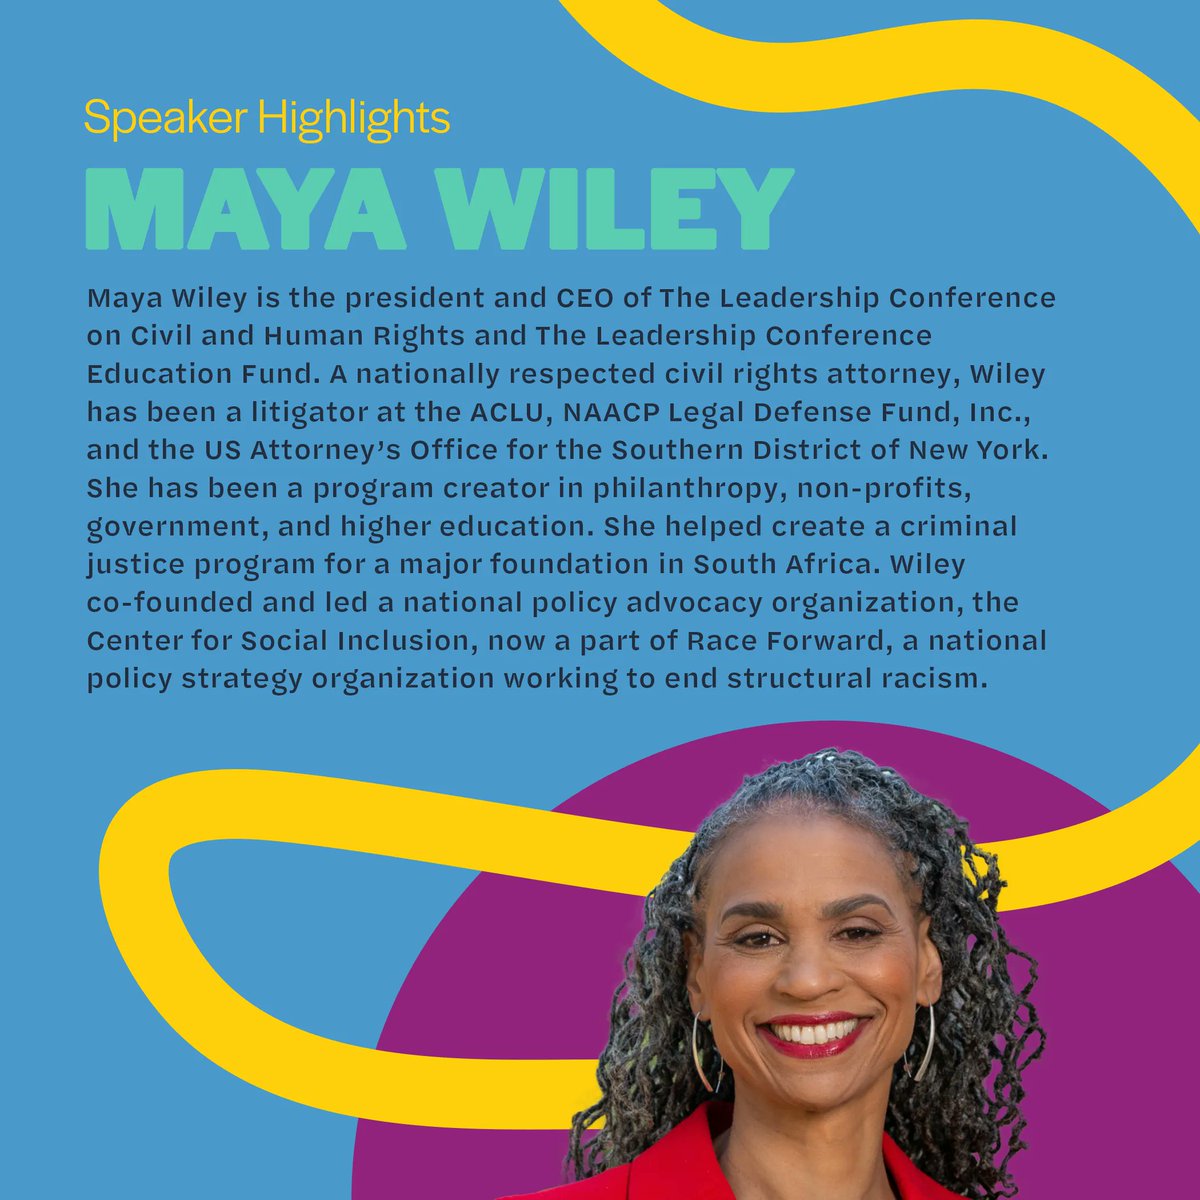 Exciting news! @mayawiley will speak TOMORROW at our conference. She will be a panelist in our opening plenary discussing how to achieve a multiracial pluralistic democracy. Learn more at buff.ly/3XFmusK. #22CI #22CI2023